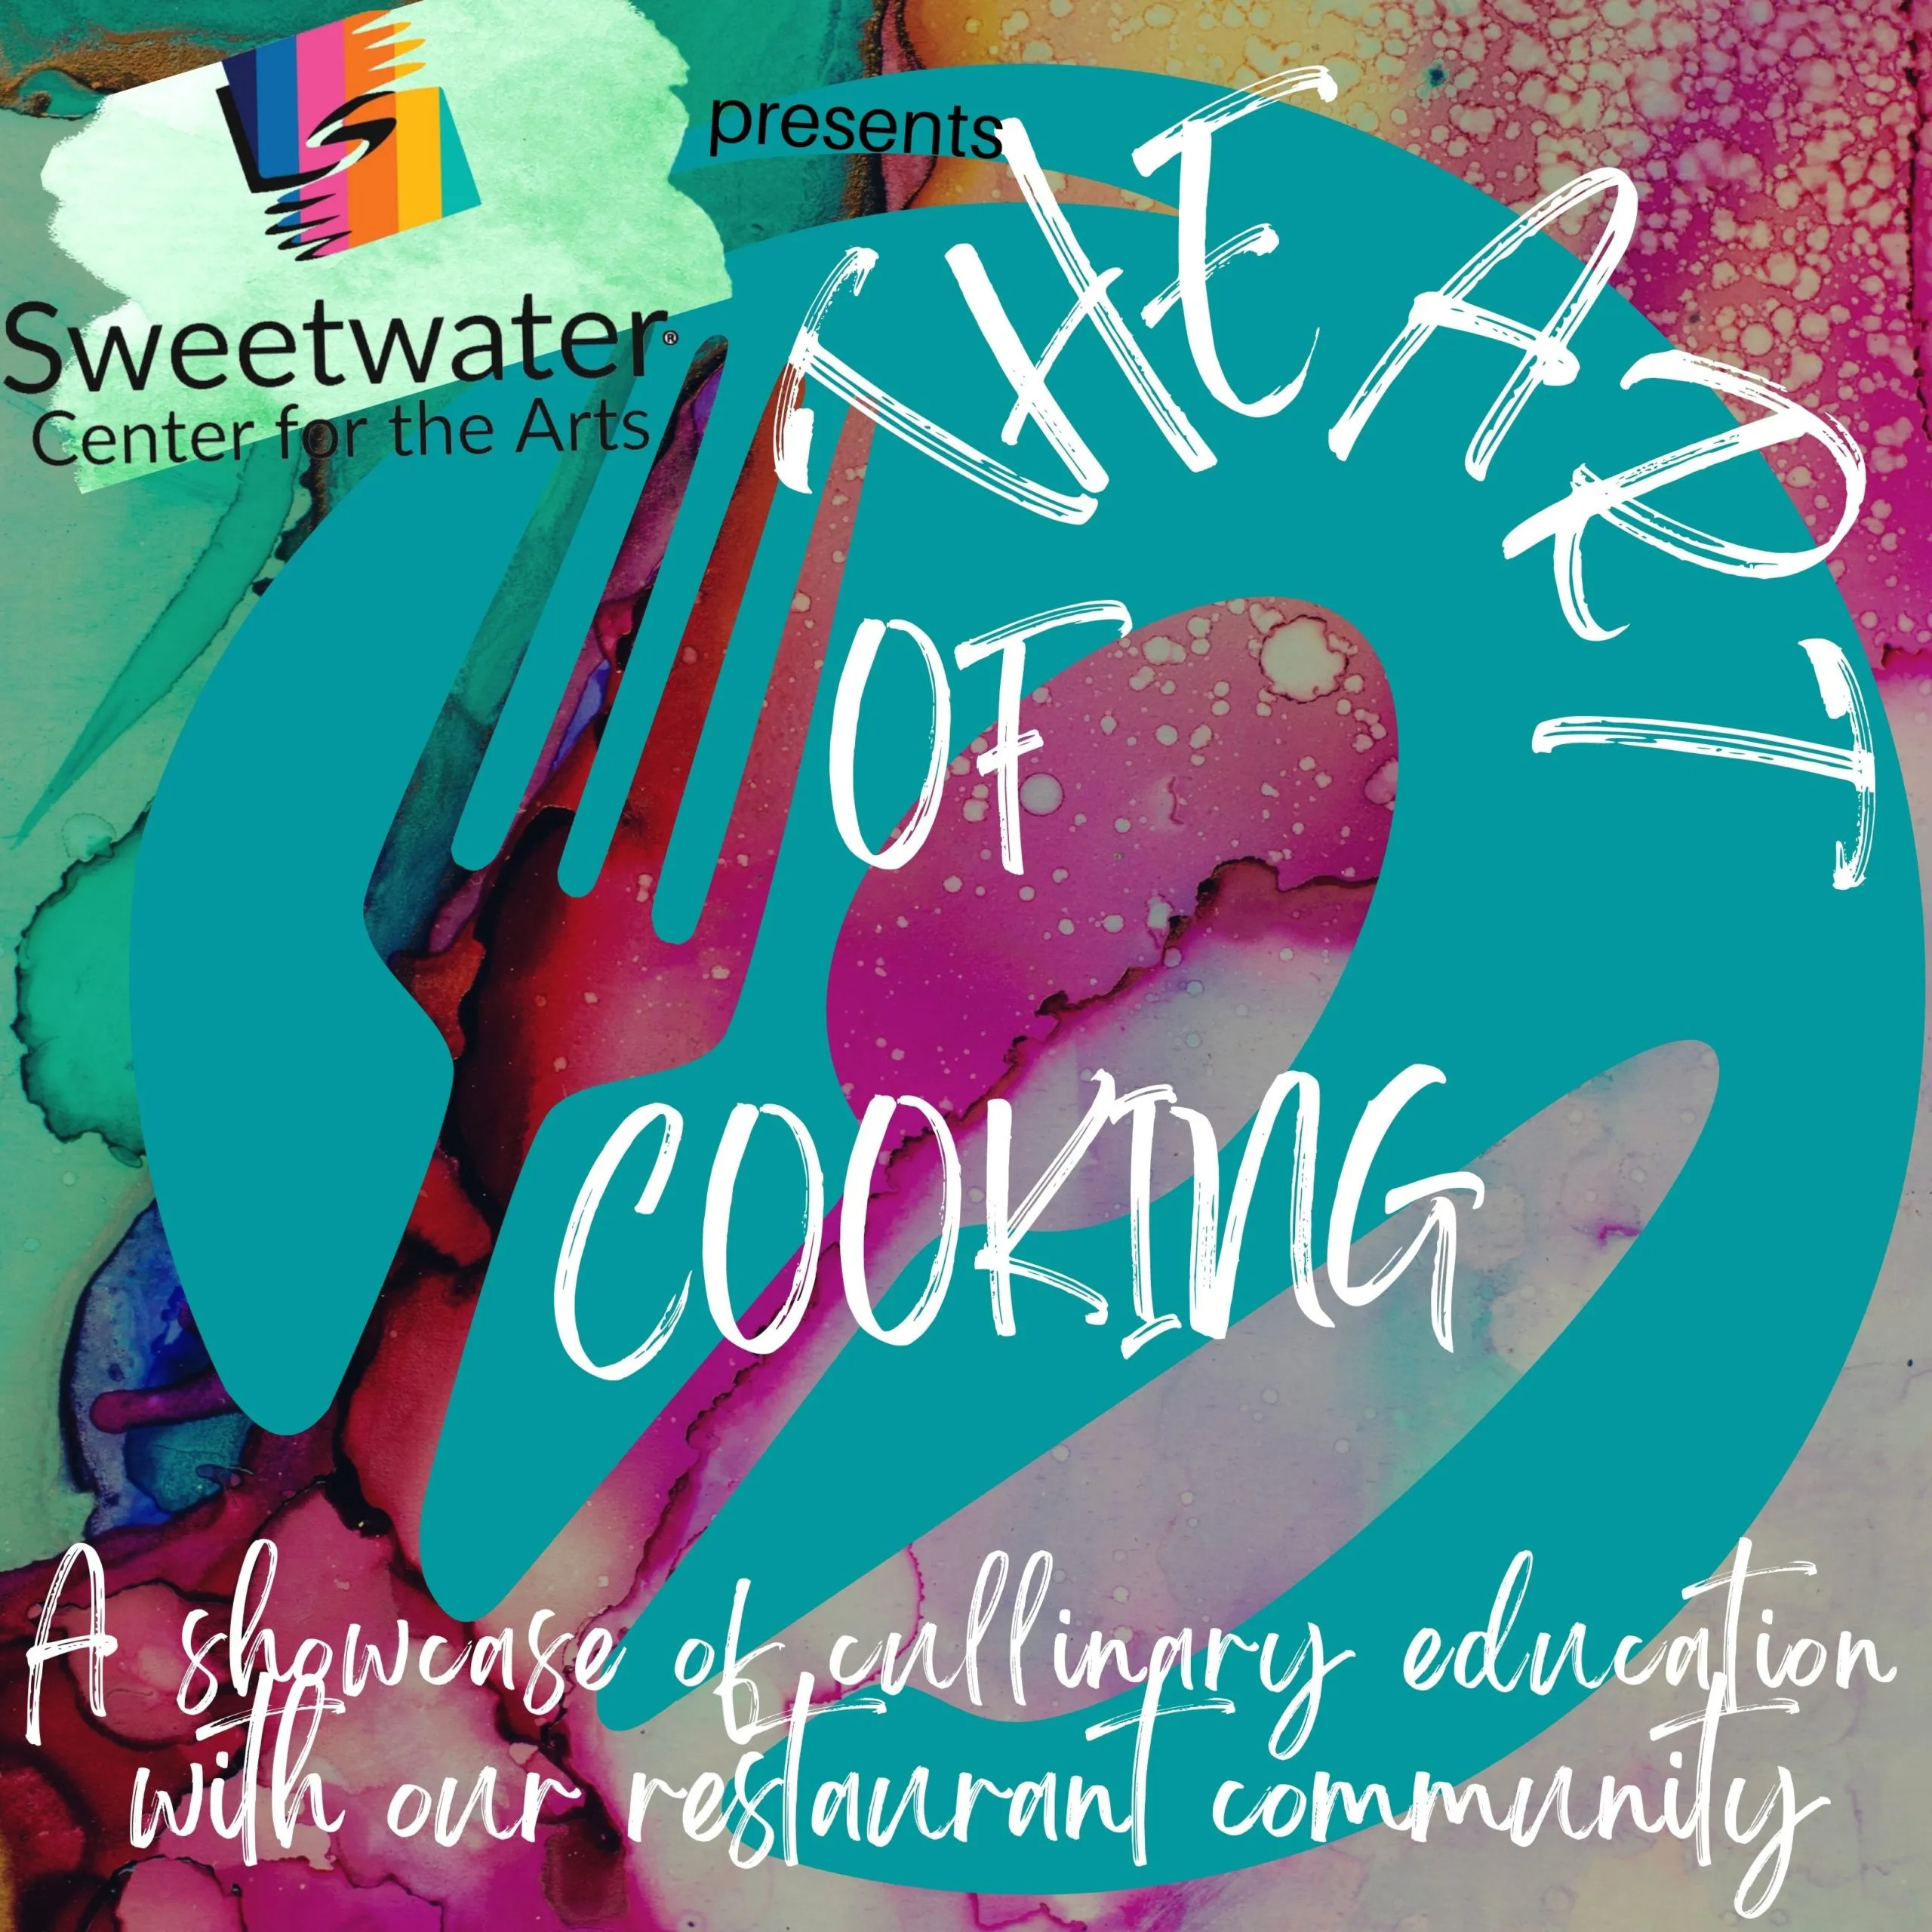 Fundraising with a new taste! The Art of Cooking